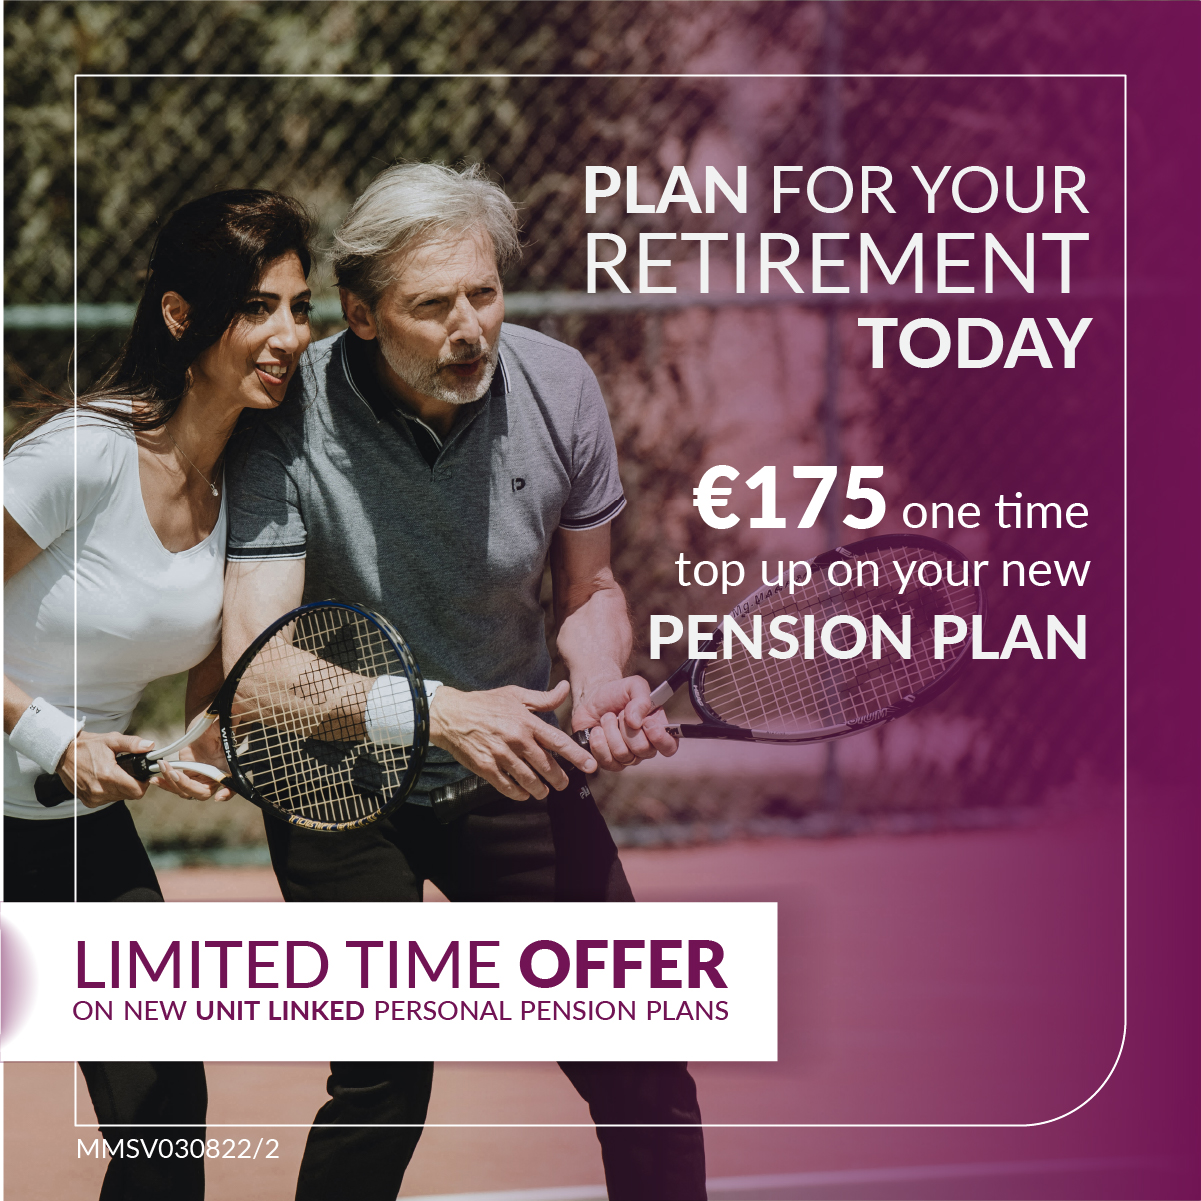 BOV ups its Pension Plans with Special Limited-Time Offer